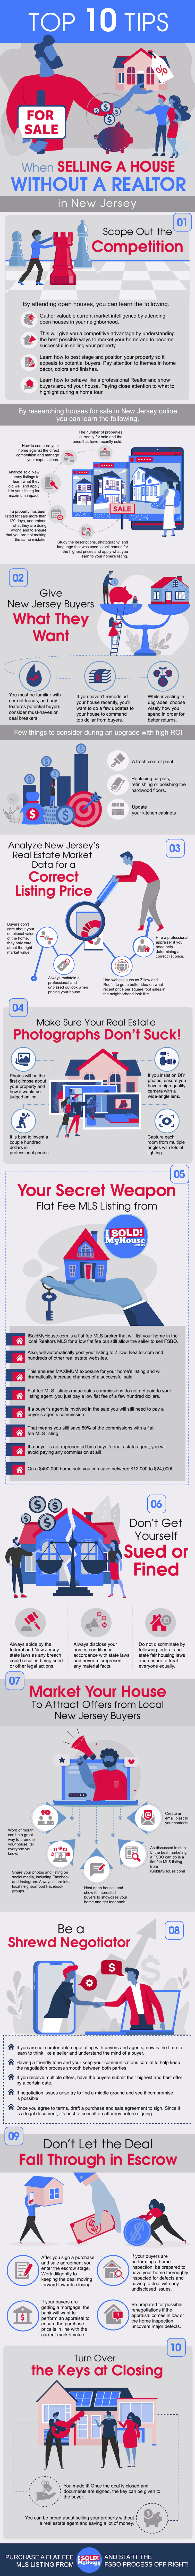 infographic of the 10 steps to sell a house in new jersey without an agent